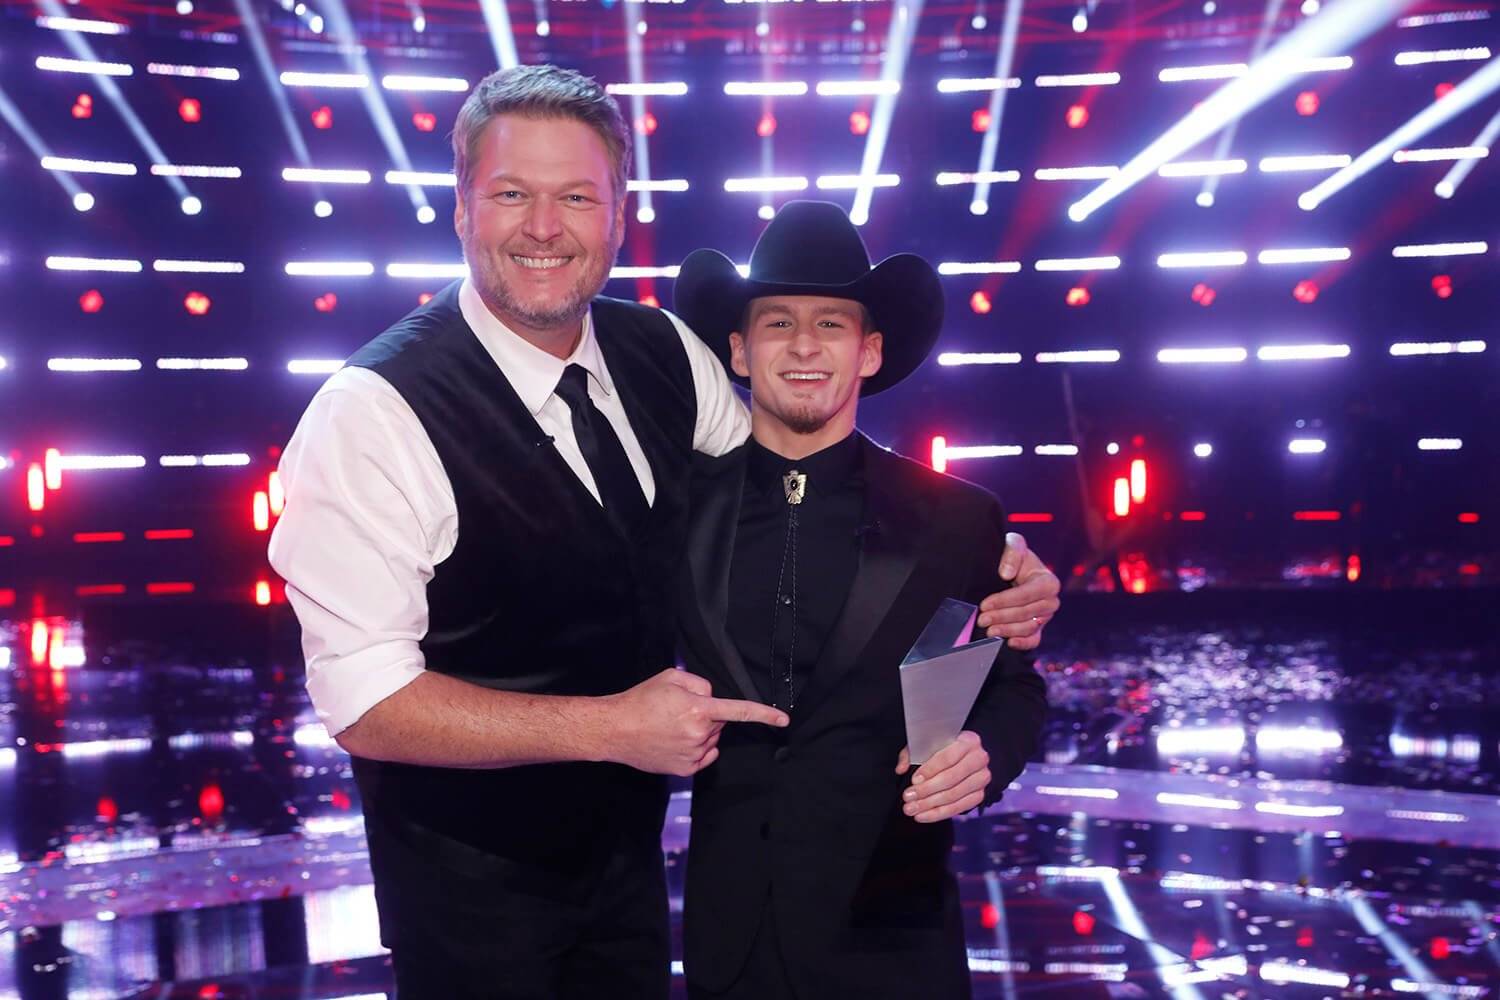 Blake Shelton hugs and points to Bryce Leatherwood as Bryce holds the winning trophy on The Voice Season 22